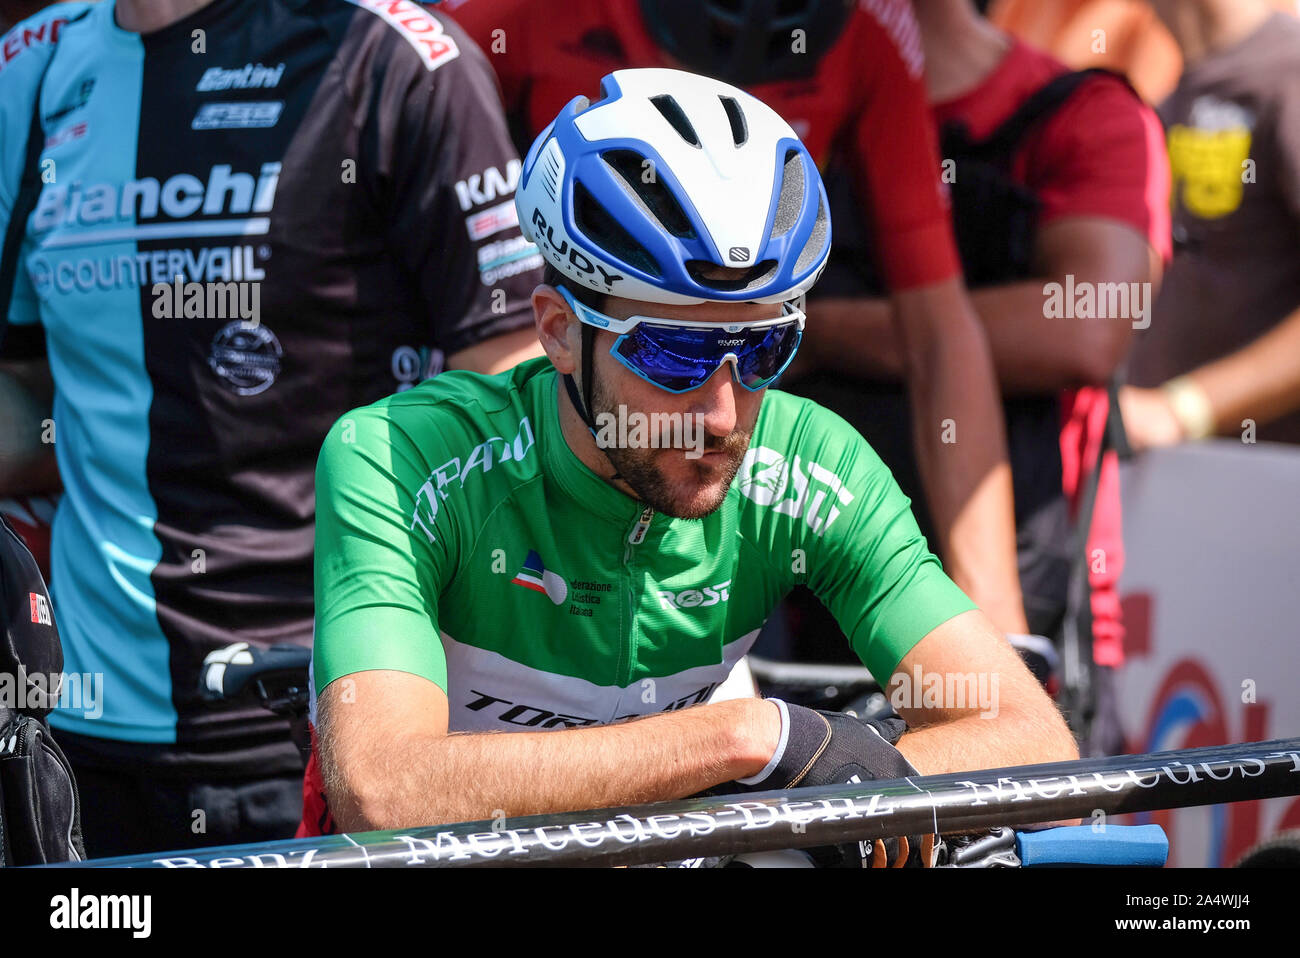 GERHARD KERSCHBAUMER  during Cross-Country World Cup - Val di Sole UCI MTB - Men, Val di Sole, Italy, 04 Aug 2019, Cycling MTB - Mountain Bike Stock Photo